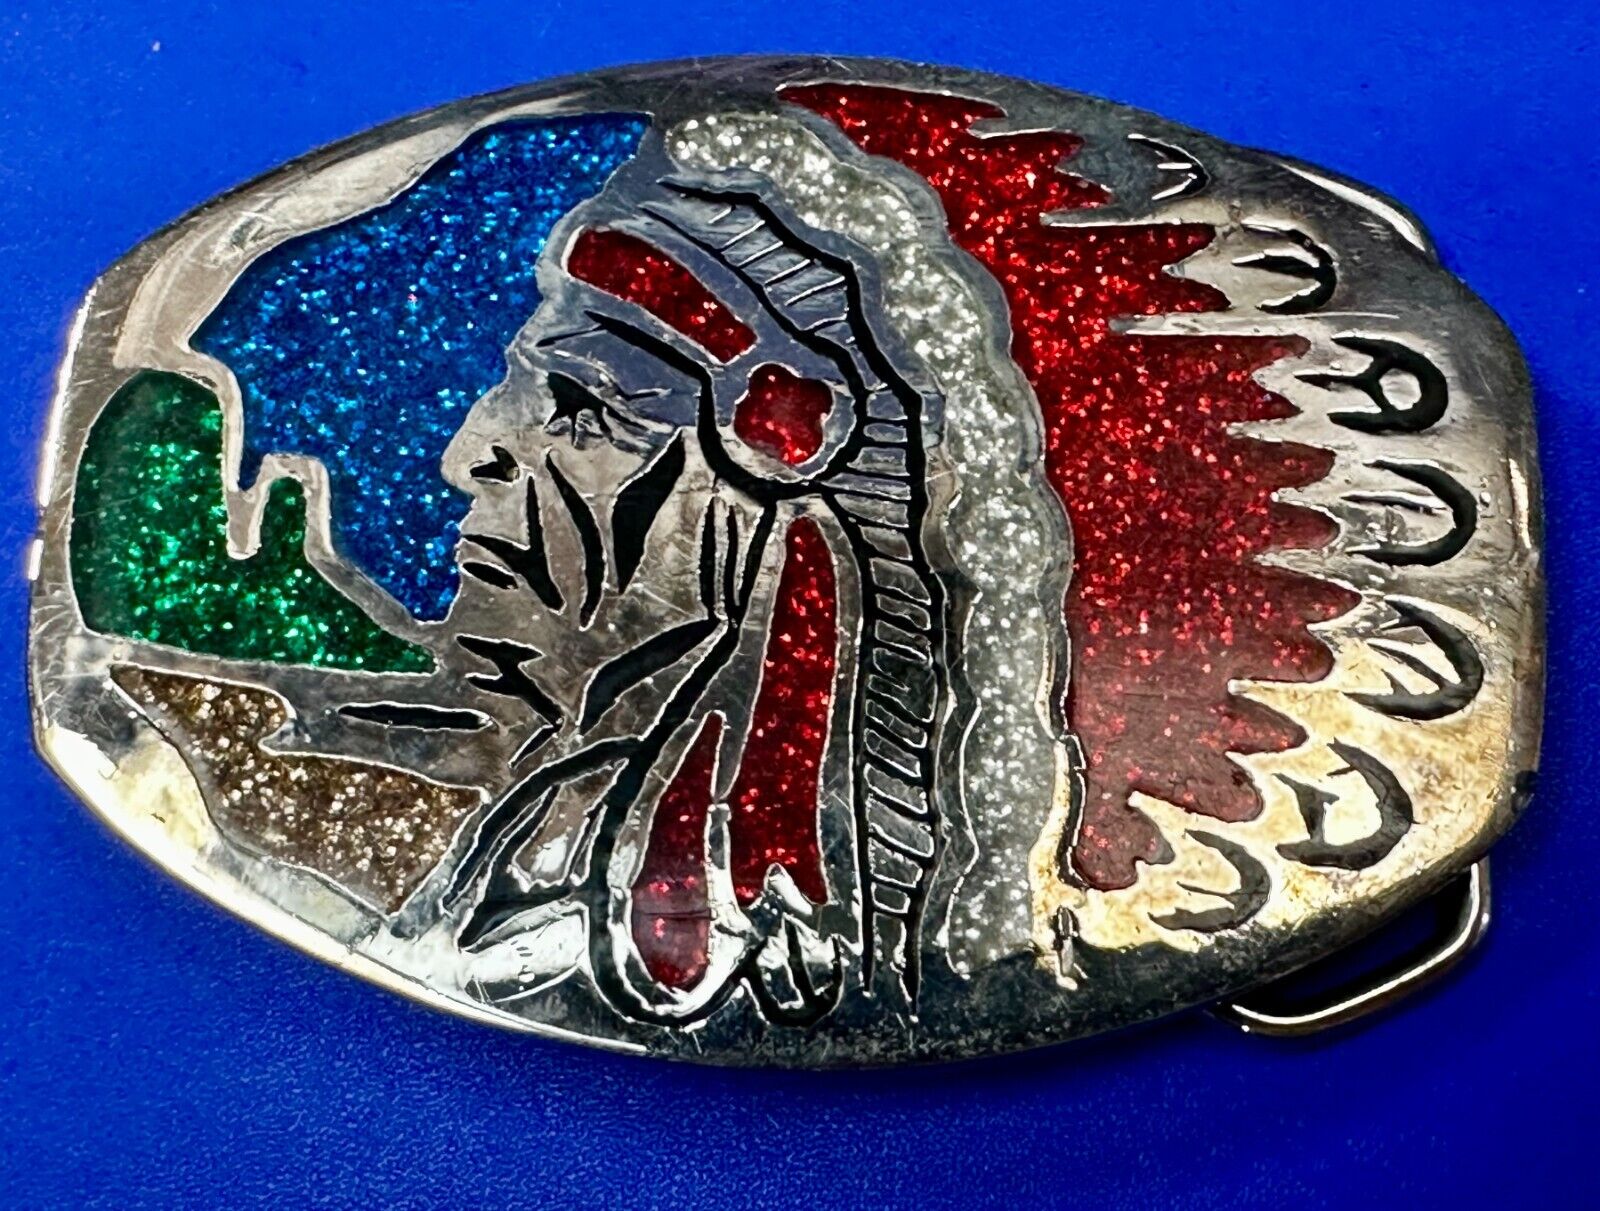 Native American Indian Chief in Headdress Inlaid Enamel Vtg 70's PSS Belt Buckle